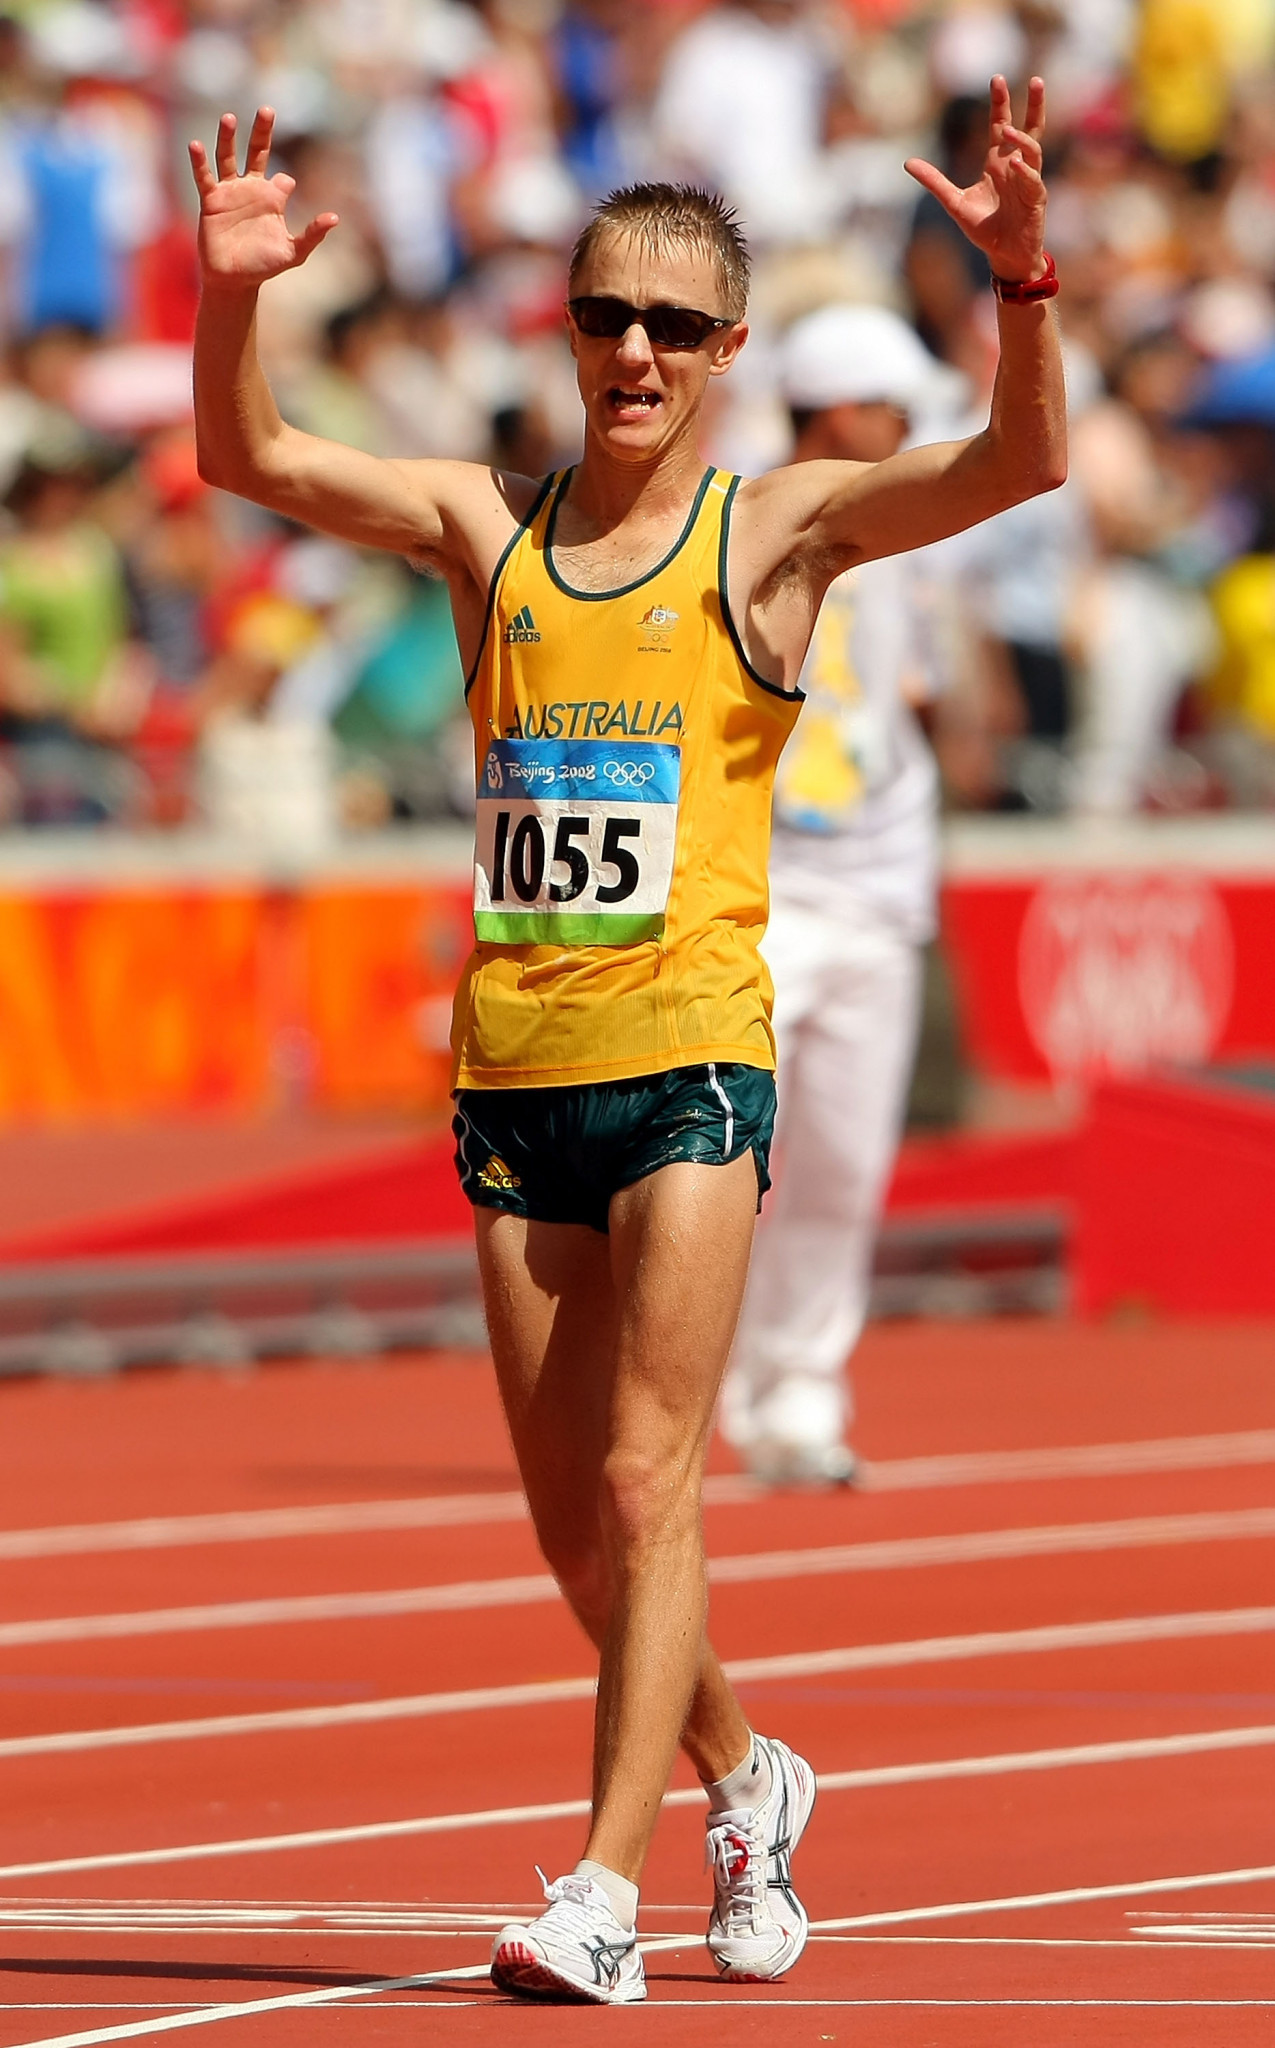 Jared Tallent won two Olympic medals at Beijing 2008, including a bronze in the 20km walk, making him the first Australian male to achieve the feat for 104 years ©Getty Images